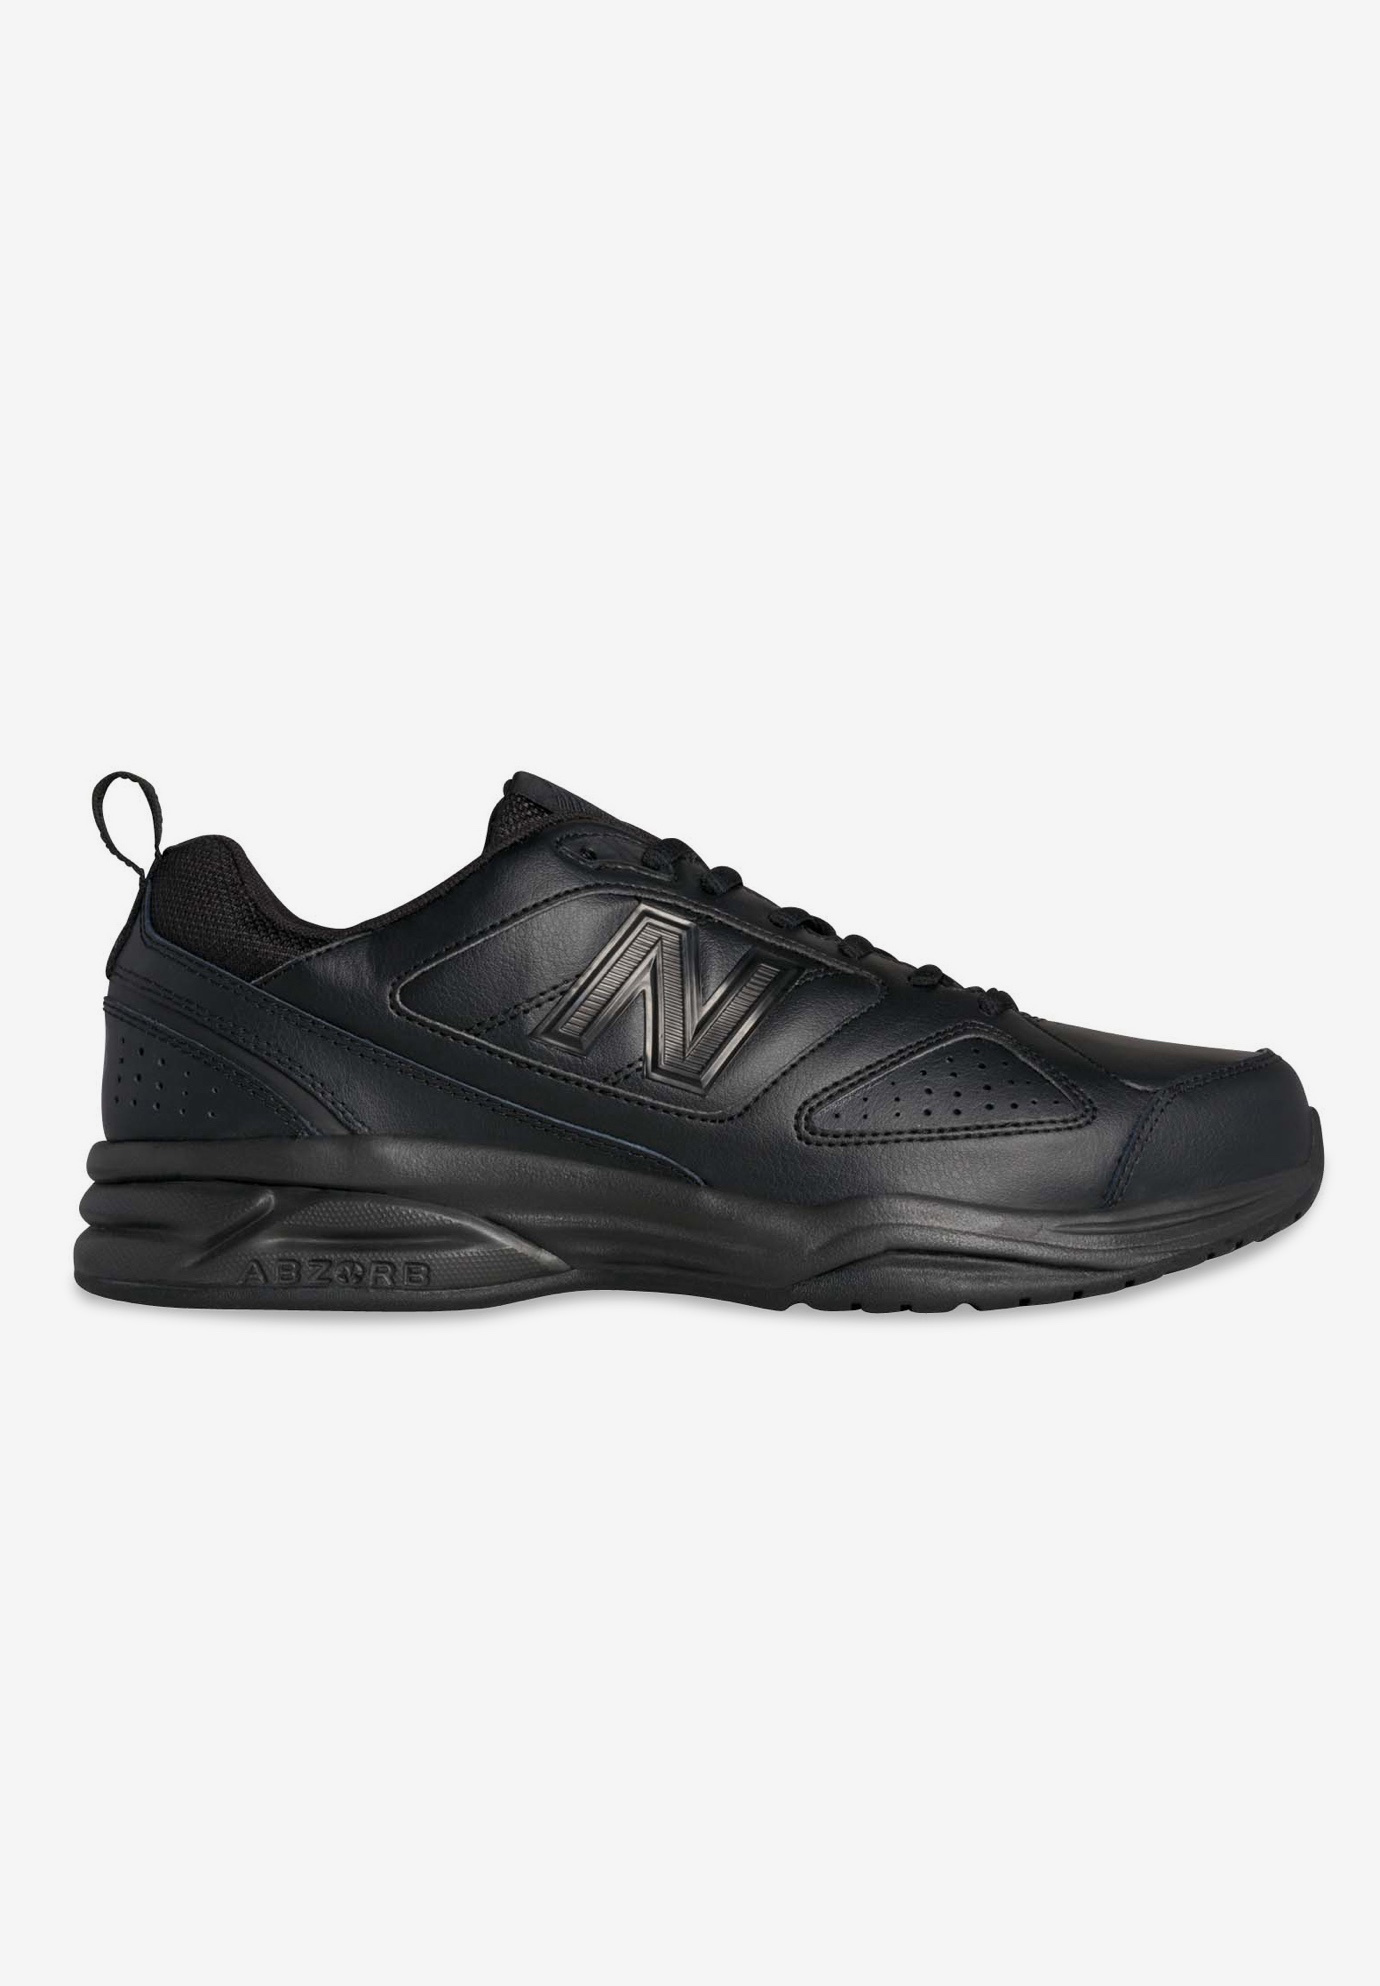 New Balance® 624V2 Sneakers| Big and Tall Athletic Shoes | King Size